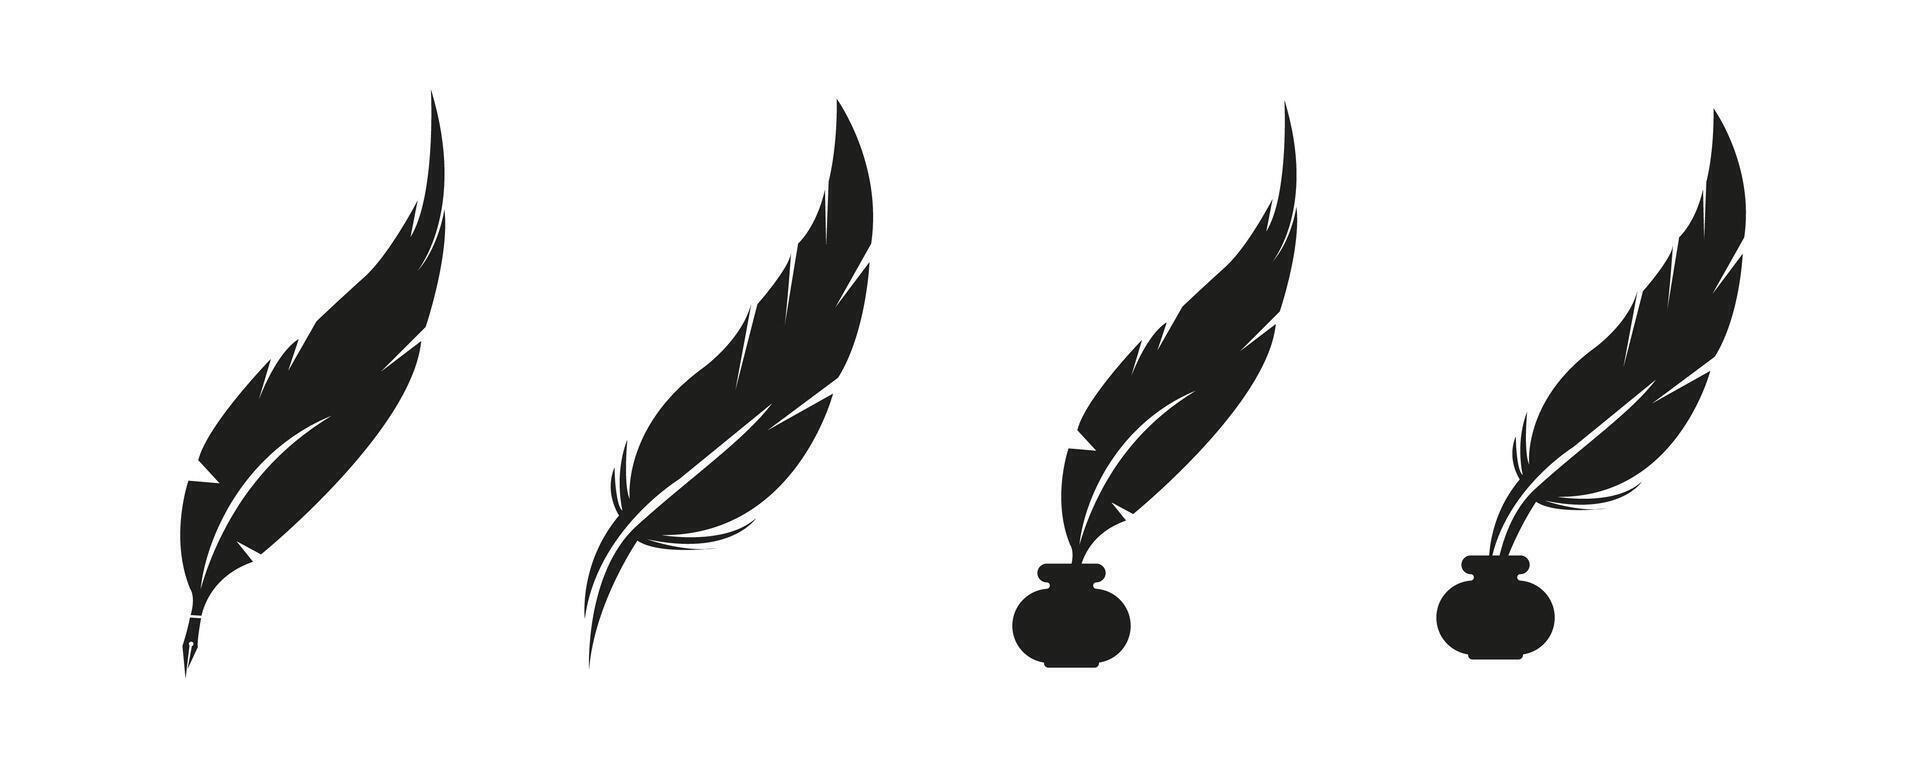 Feather pen silhouette. Ink writing tool icons. vector